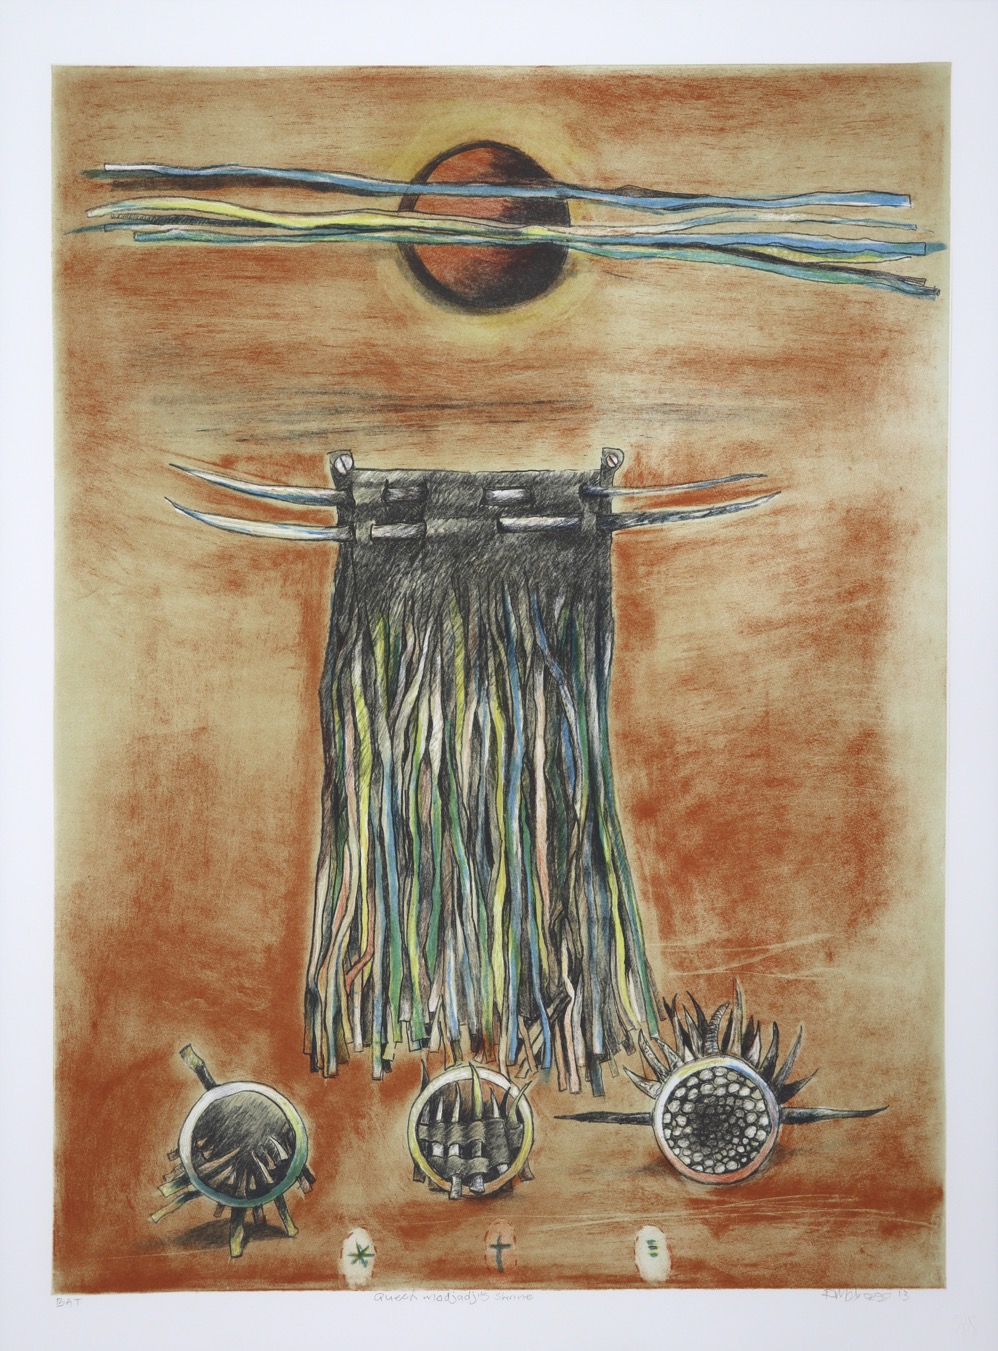 Bottom of print three round objects with porcupine quills, middle shows tasselled leather garment, sun with cloud lines at top.